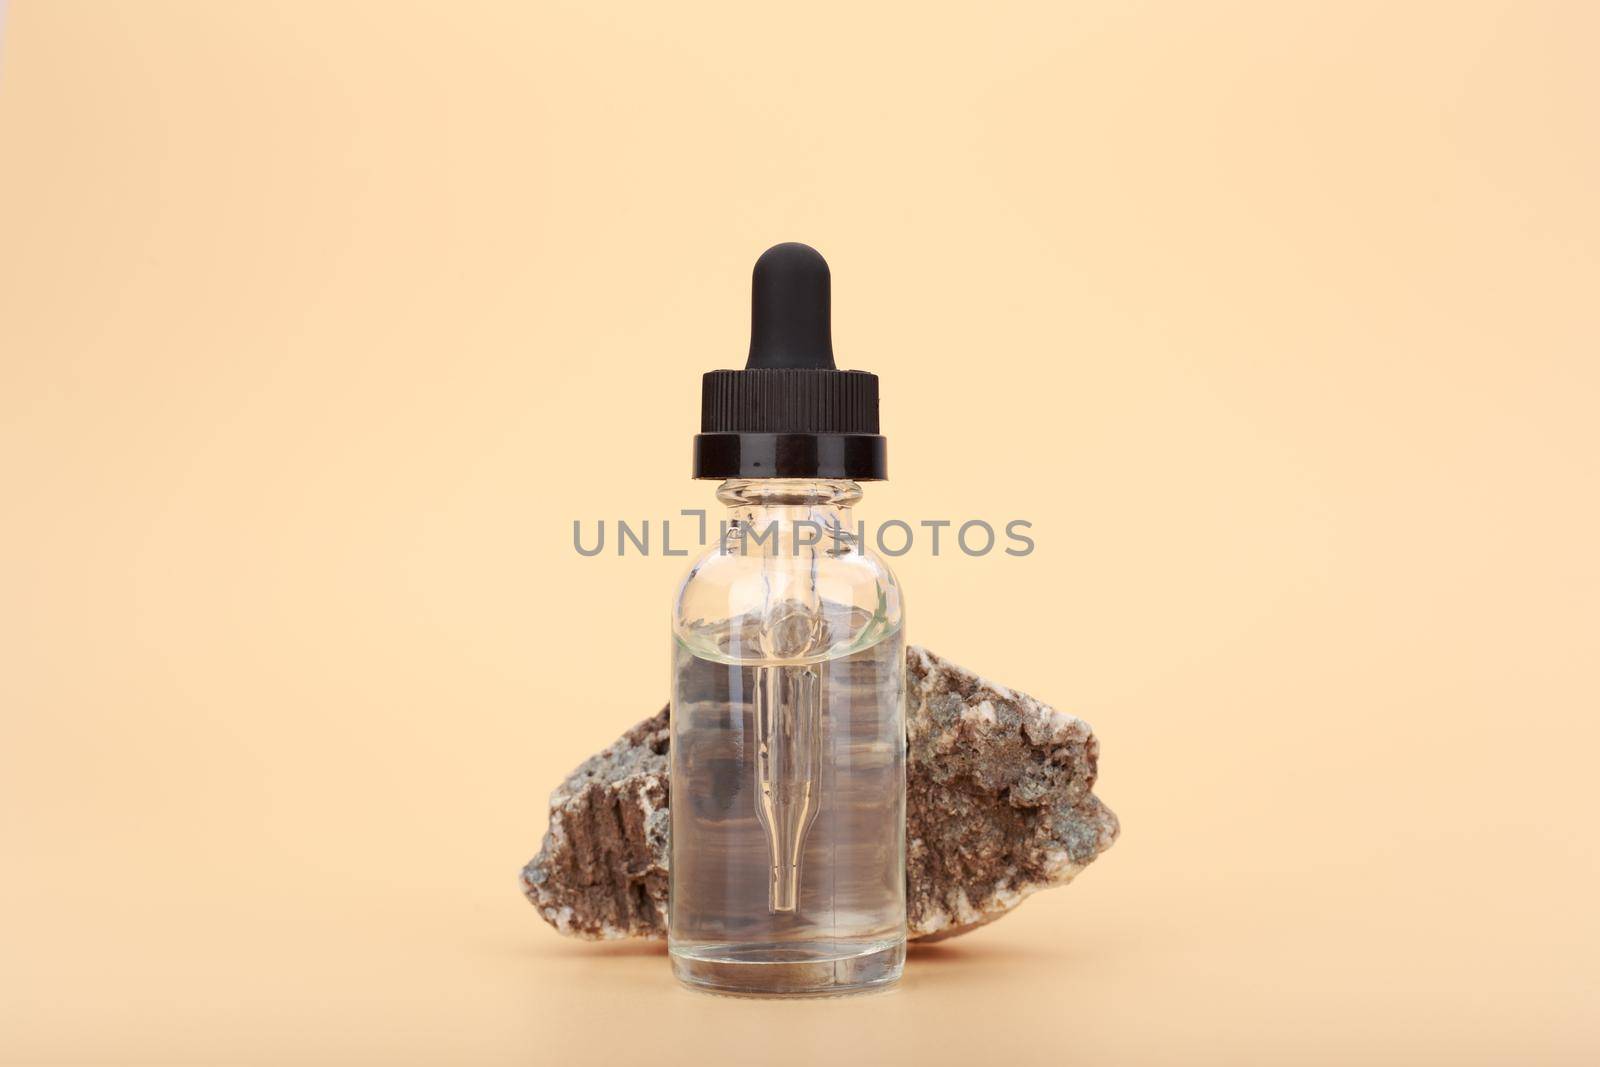 Transparent skin serum bottle close up next to natural stone against bright beige background with copy space by Senorina_Irina